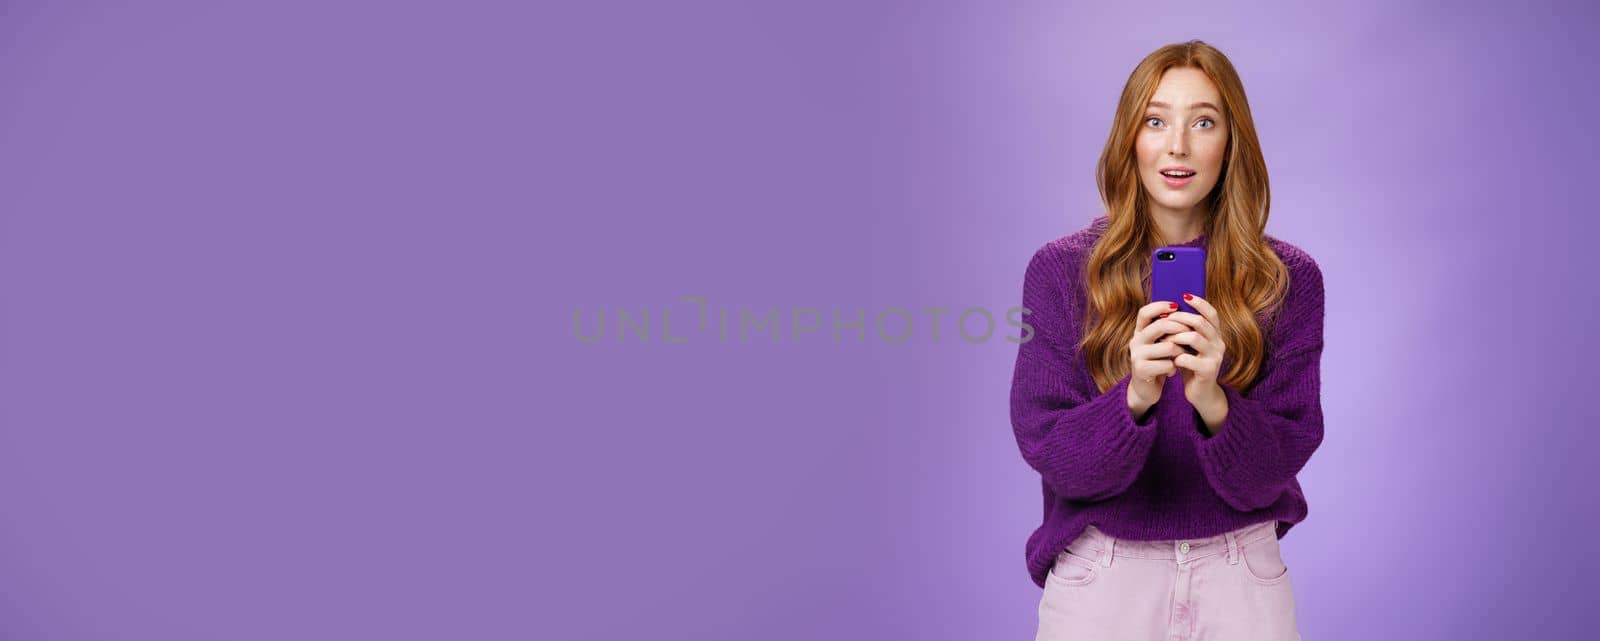 Impressed speechless cute redhead female actor receiving awesome surprising message on mobile phone open mouth from amazement and raising eyebrows astonished, posing over purple wall. Technology and people emotions concept